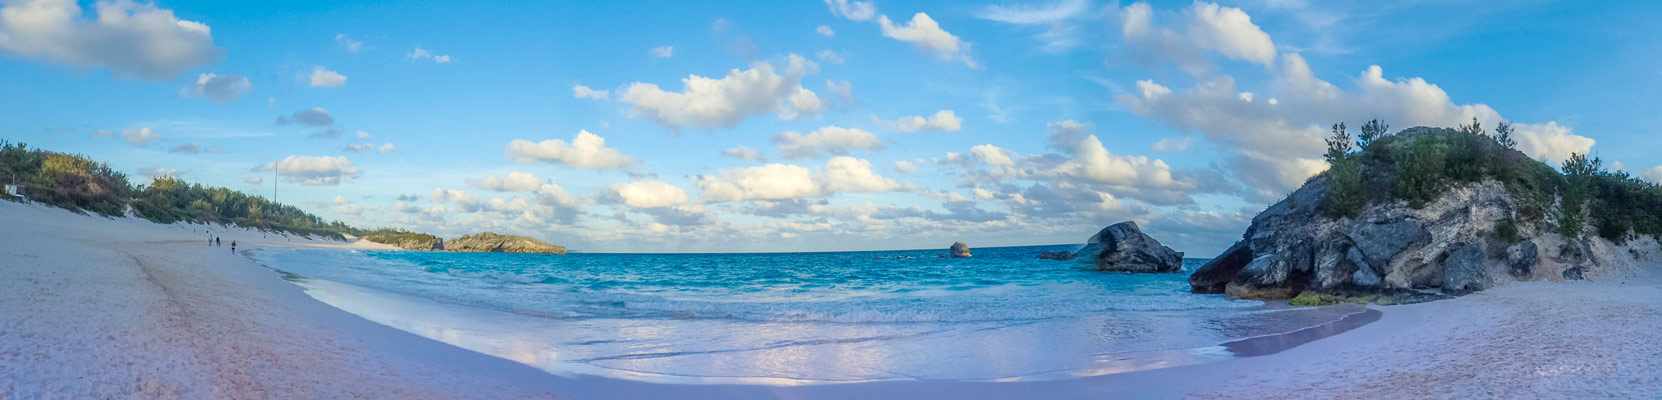 Pink sands and turquoise water of Horseshoe Bay Beach in Bermuda